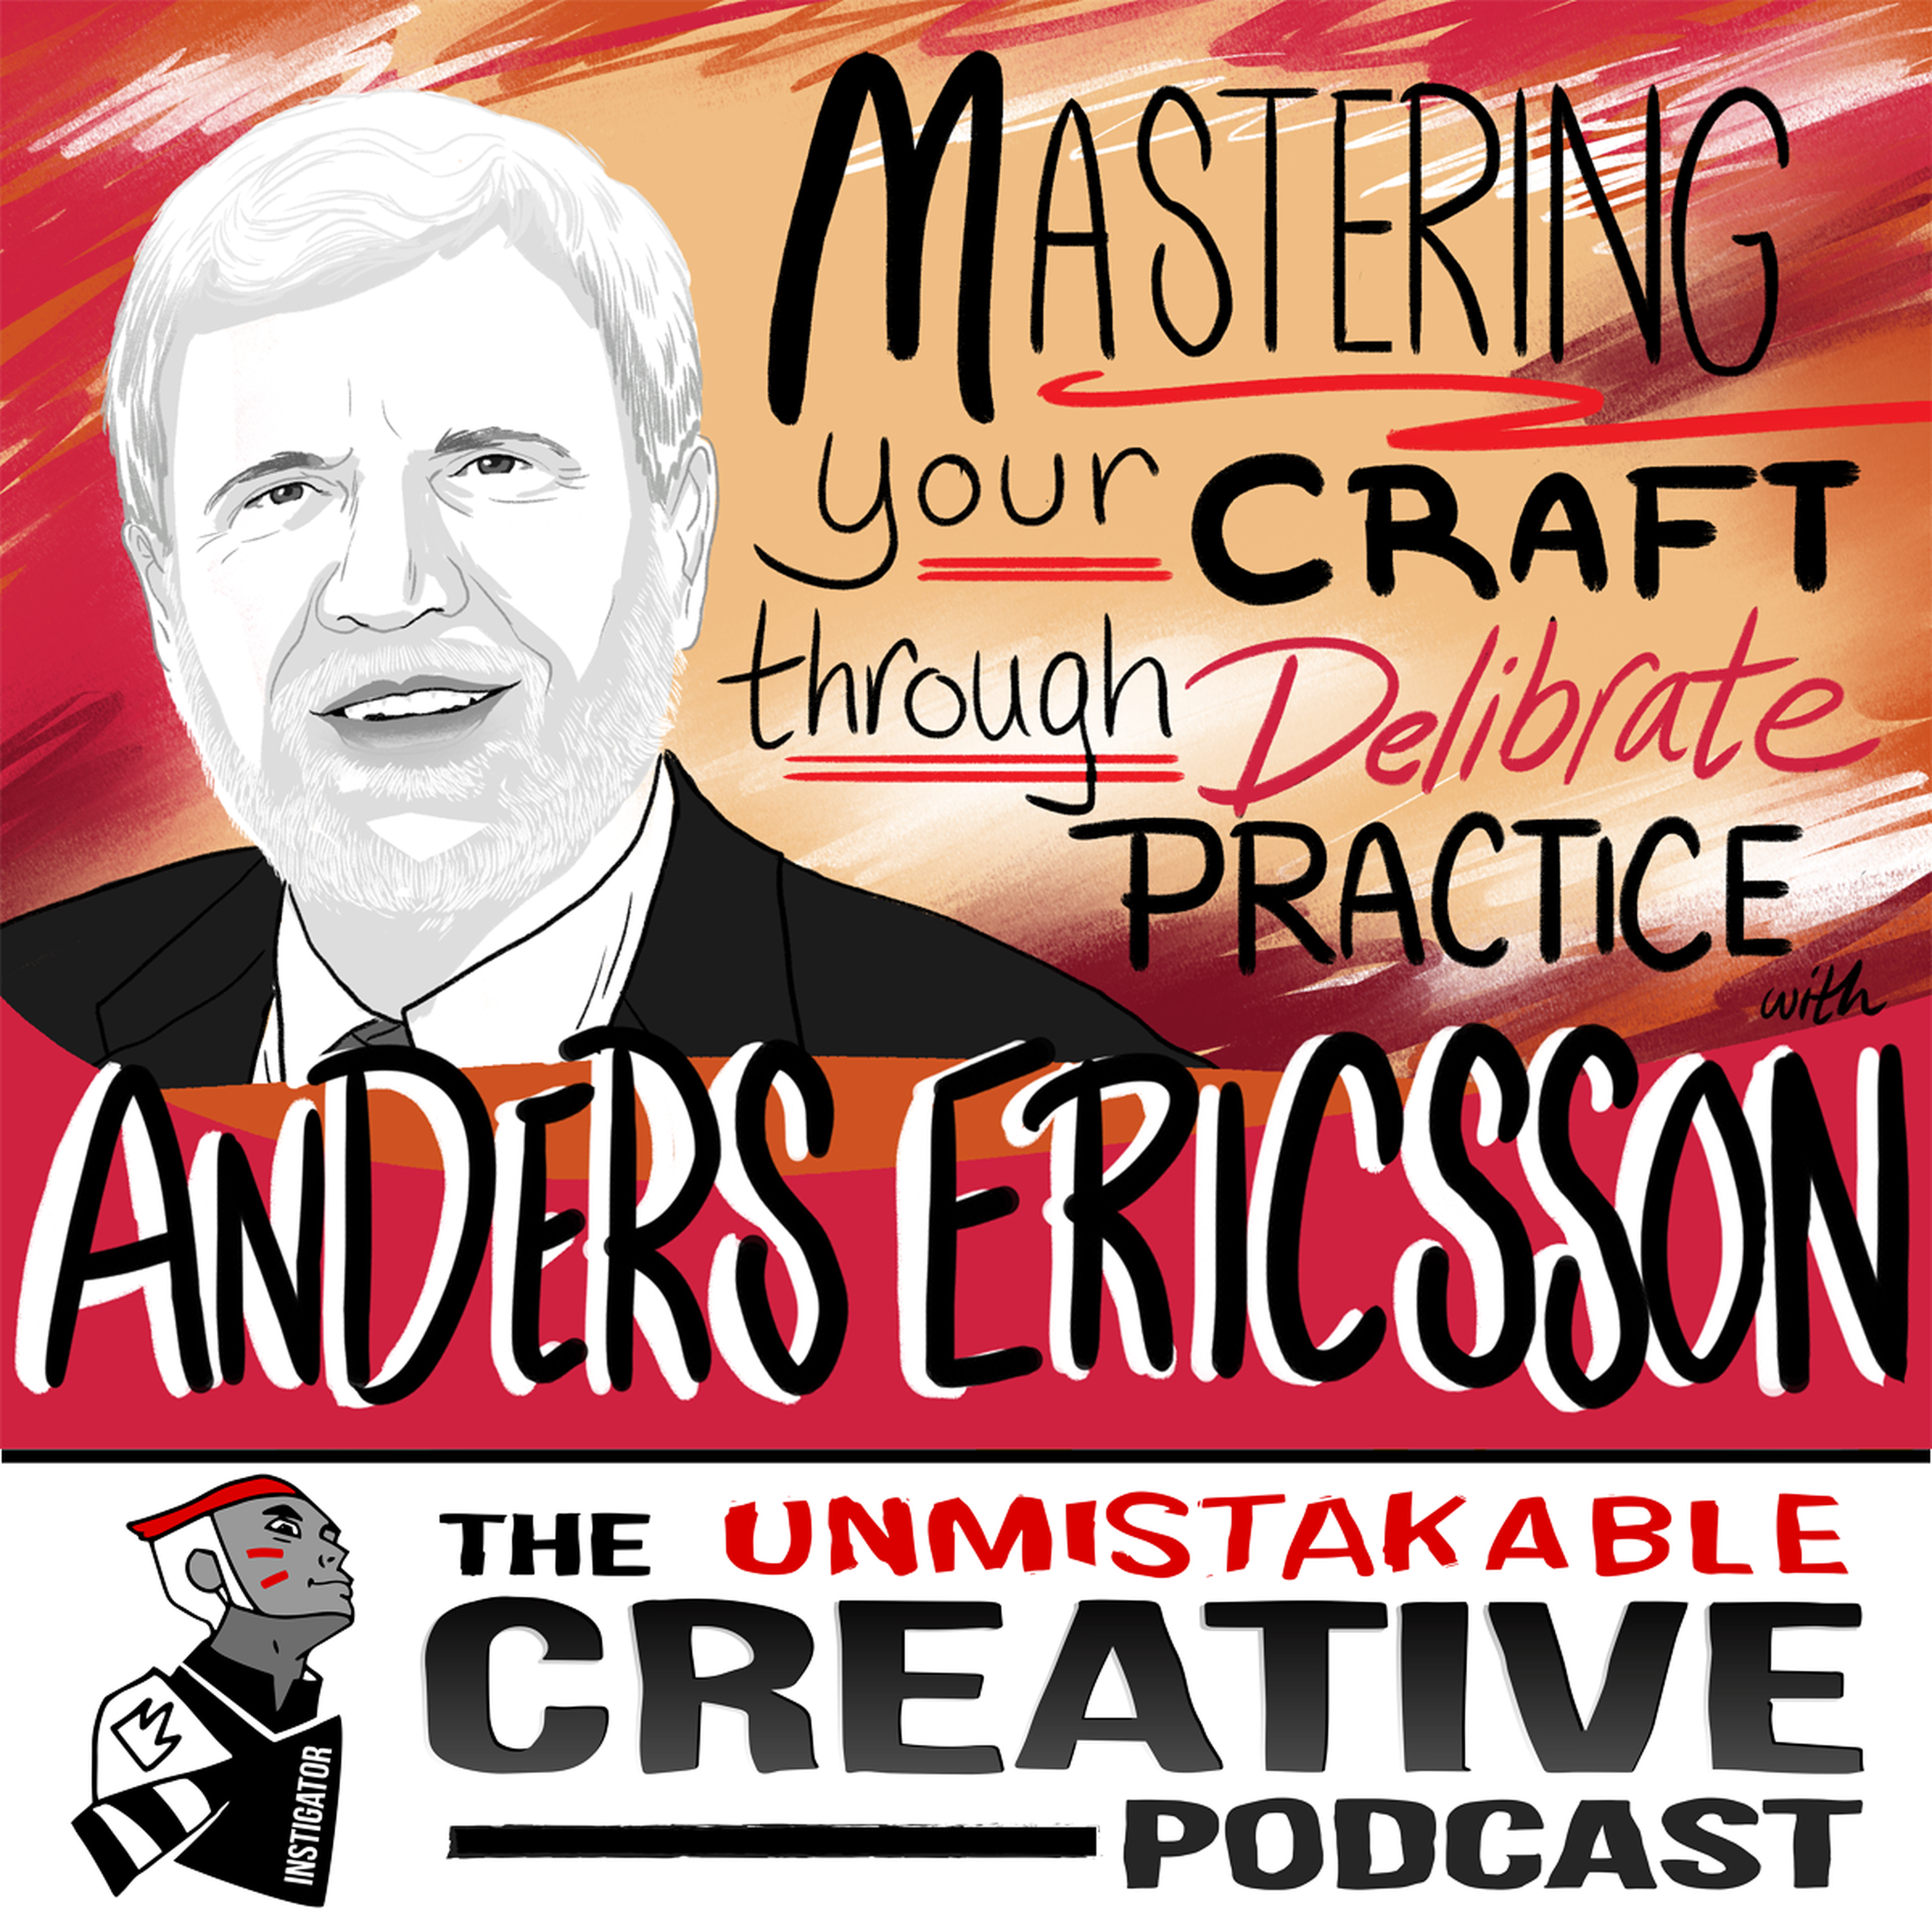 Best of: Mastering Your Craft Through Deliberate Practice with Anders Ericsson Image